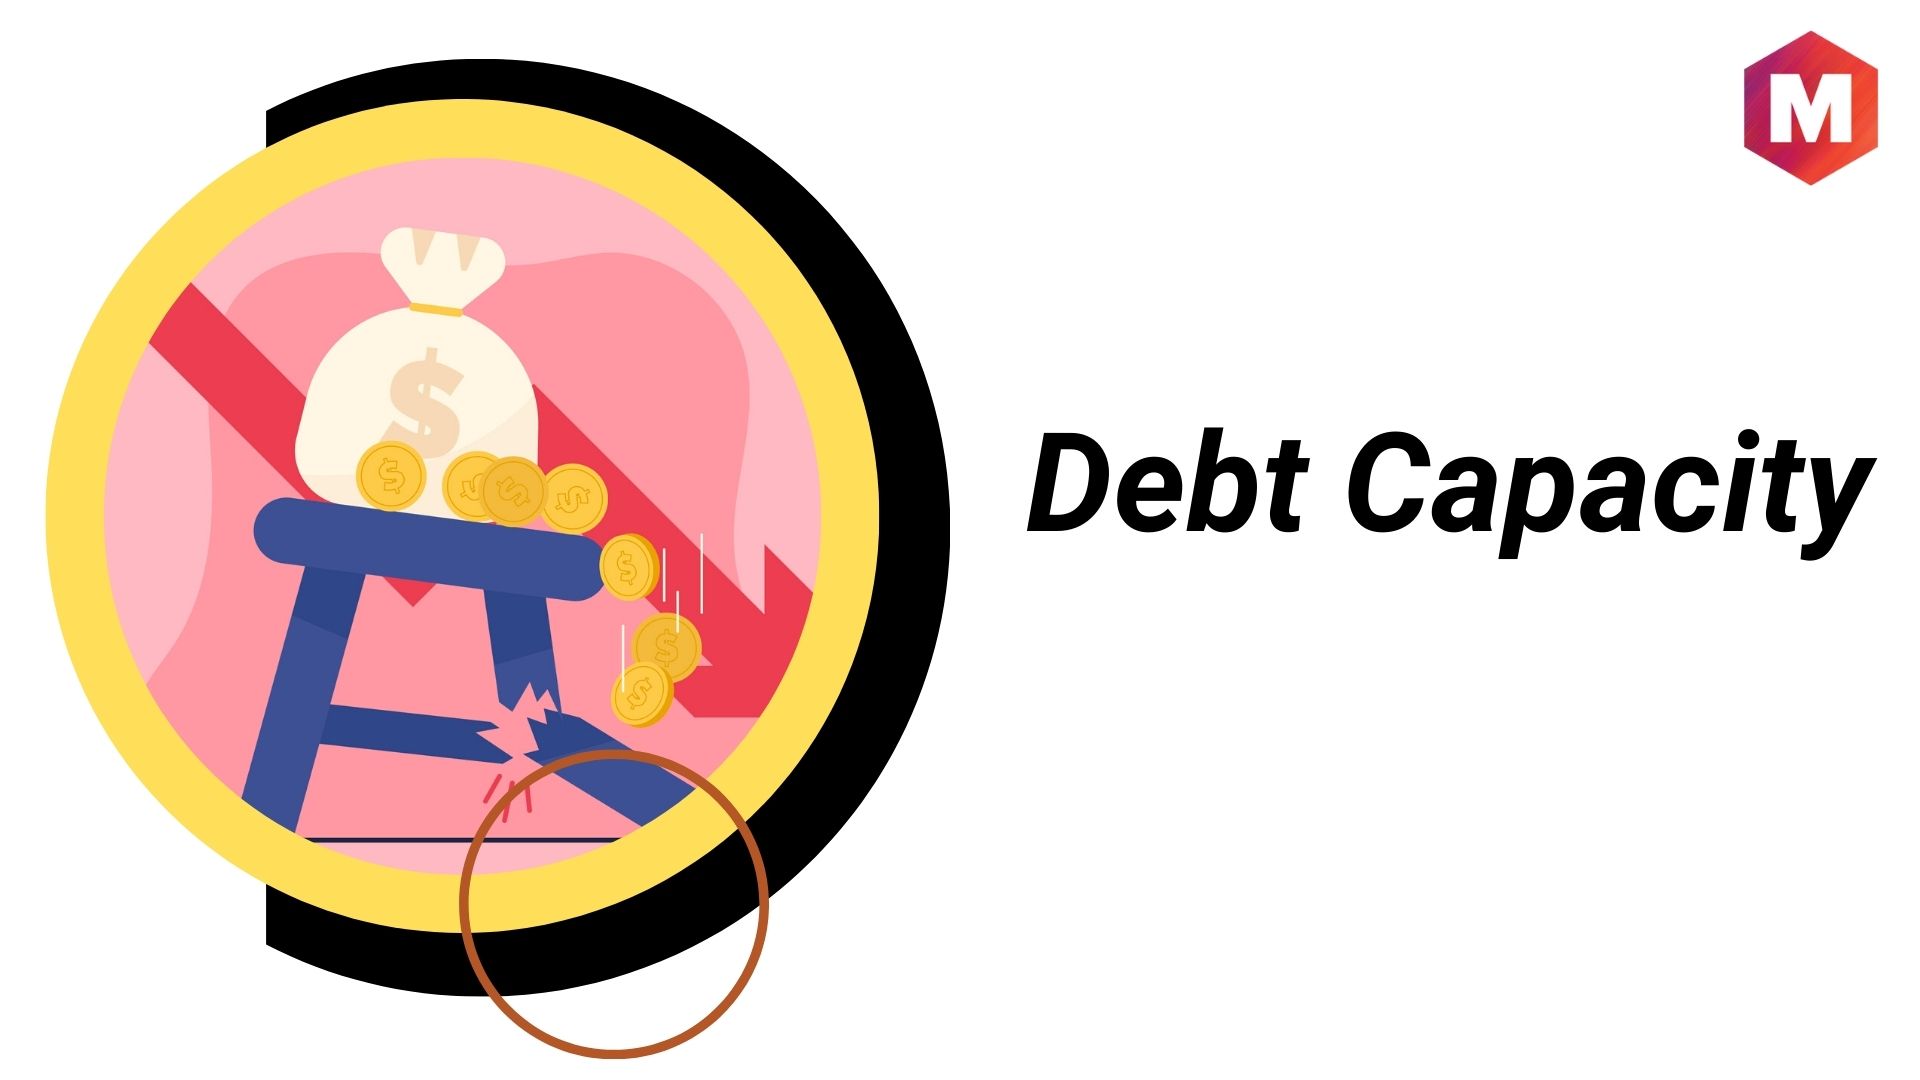 What Is Debt Capacity? Definition, Calculations And Factors That Affect It